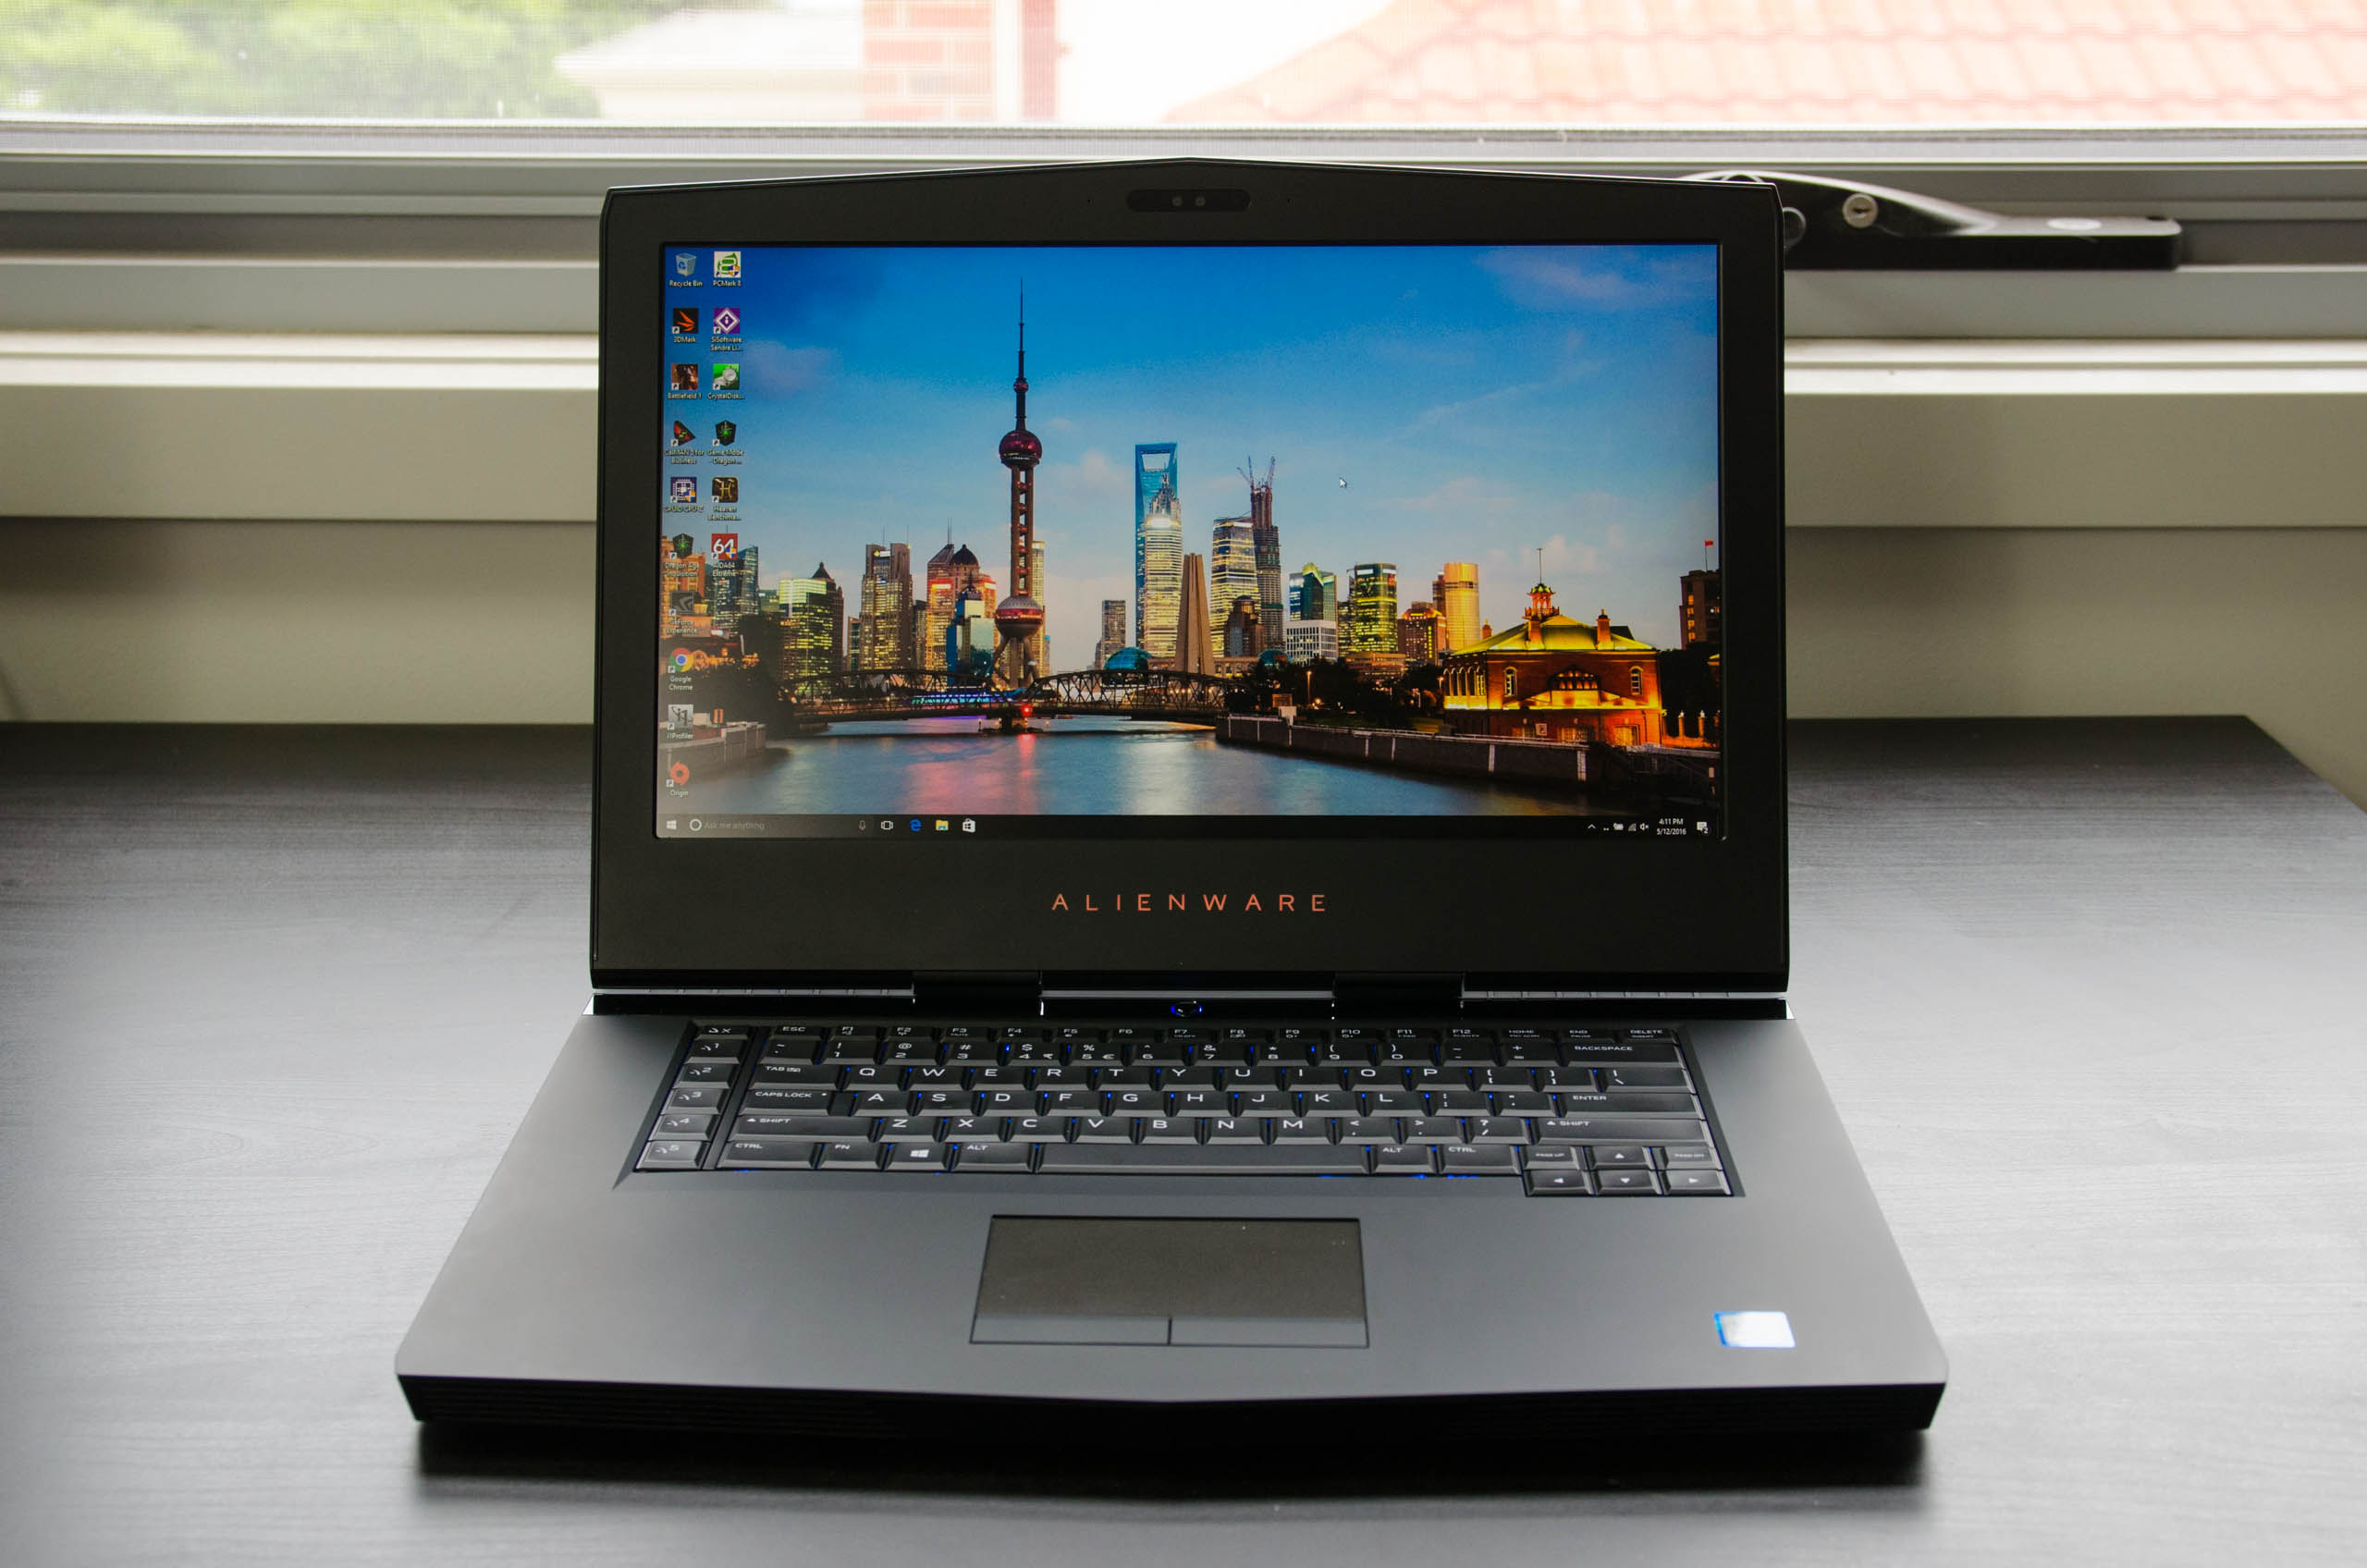 Alienware 15 R3 Review Photo Gallery - TechSpot